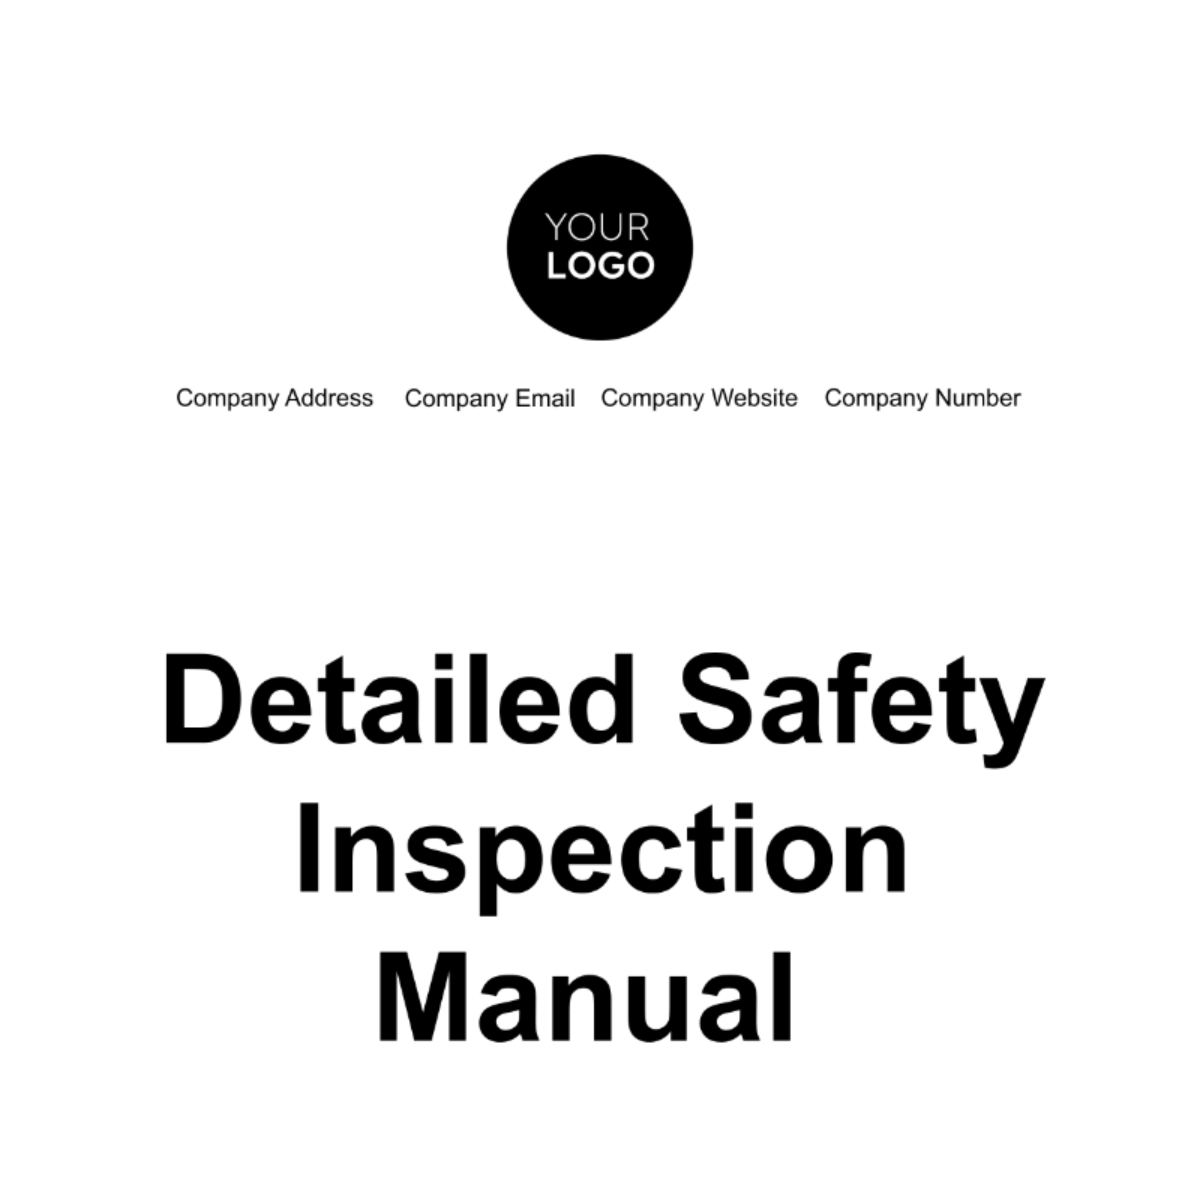 Detailed Safety Inspection Manual Template